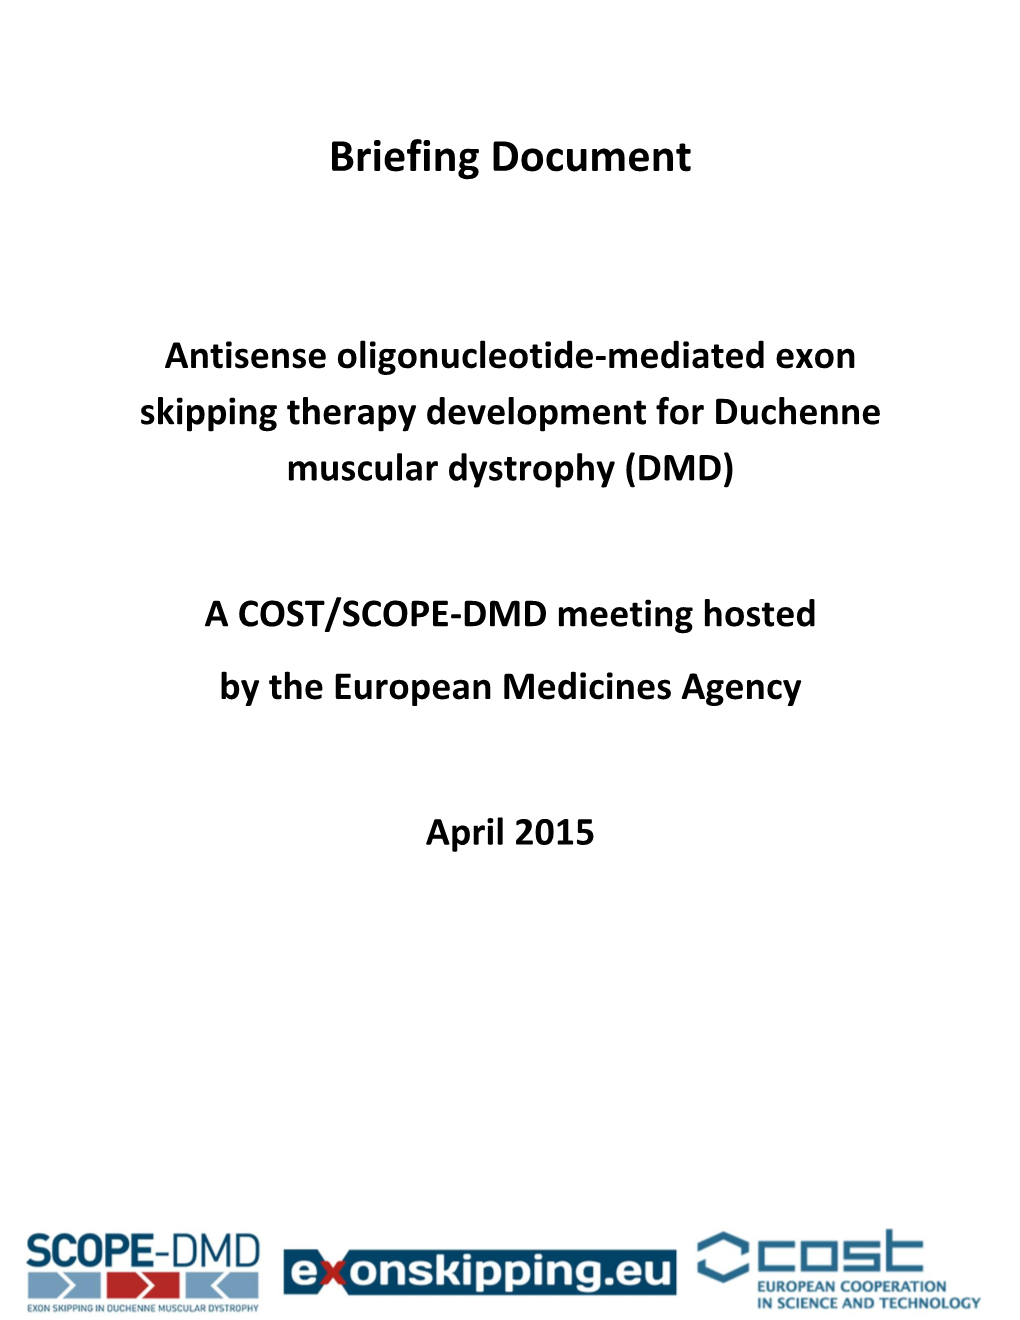 Briefing Document – COST and SCOPE-DMD EMA Meeting